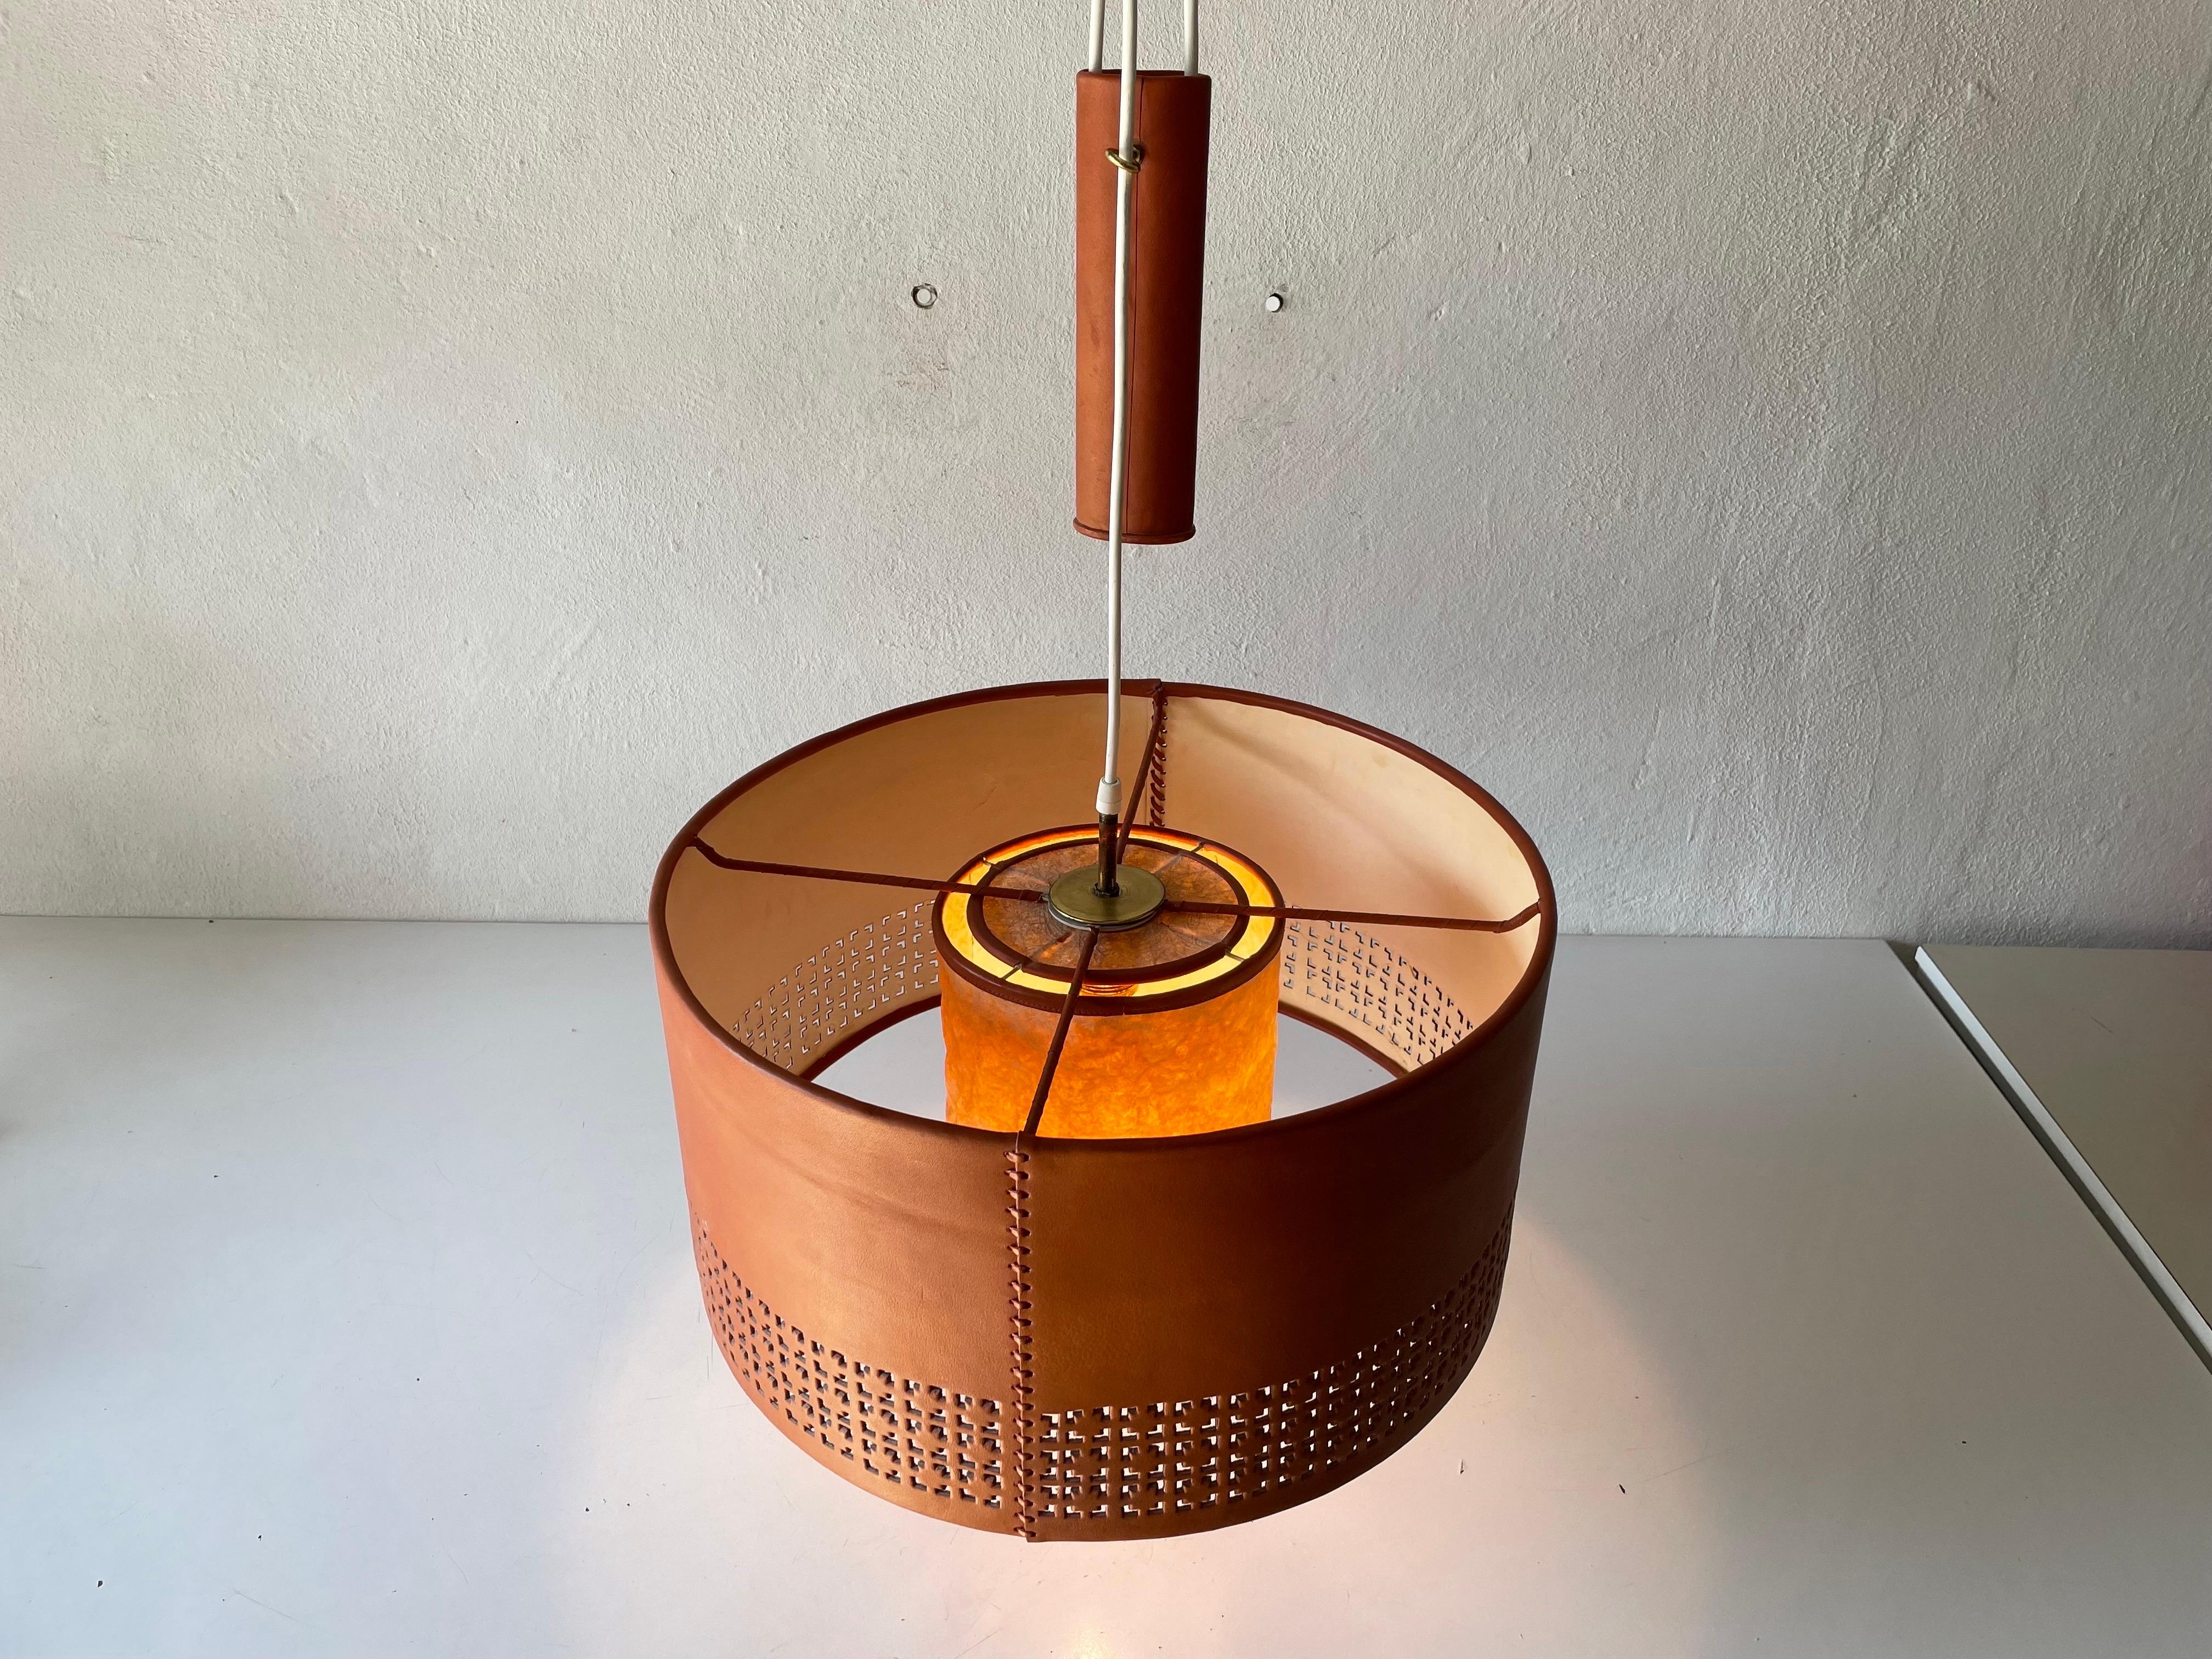 Cylindrical Leather Shade with Motifs Counterweight Pendant Lamp, 1960s, Germany For Sale 7